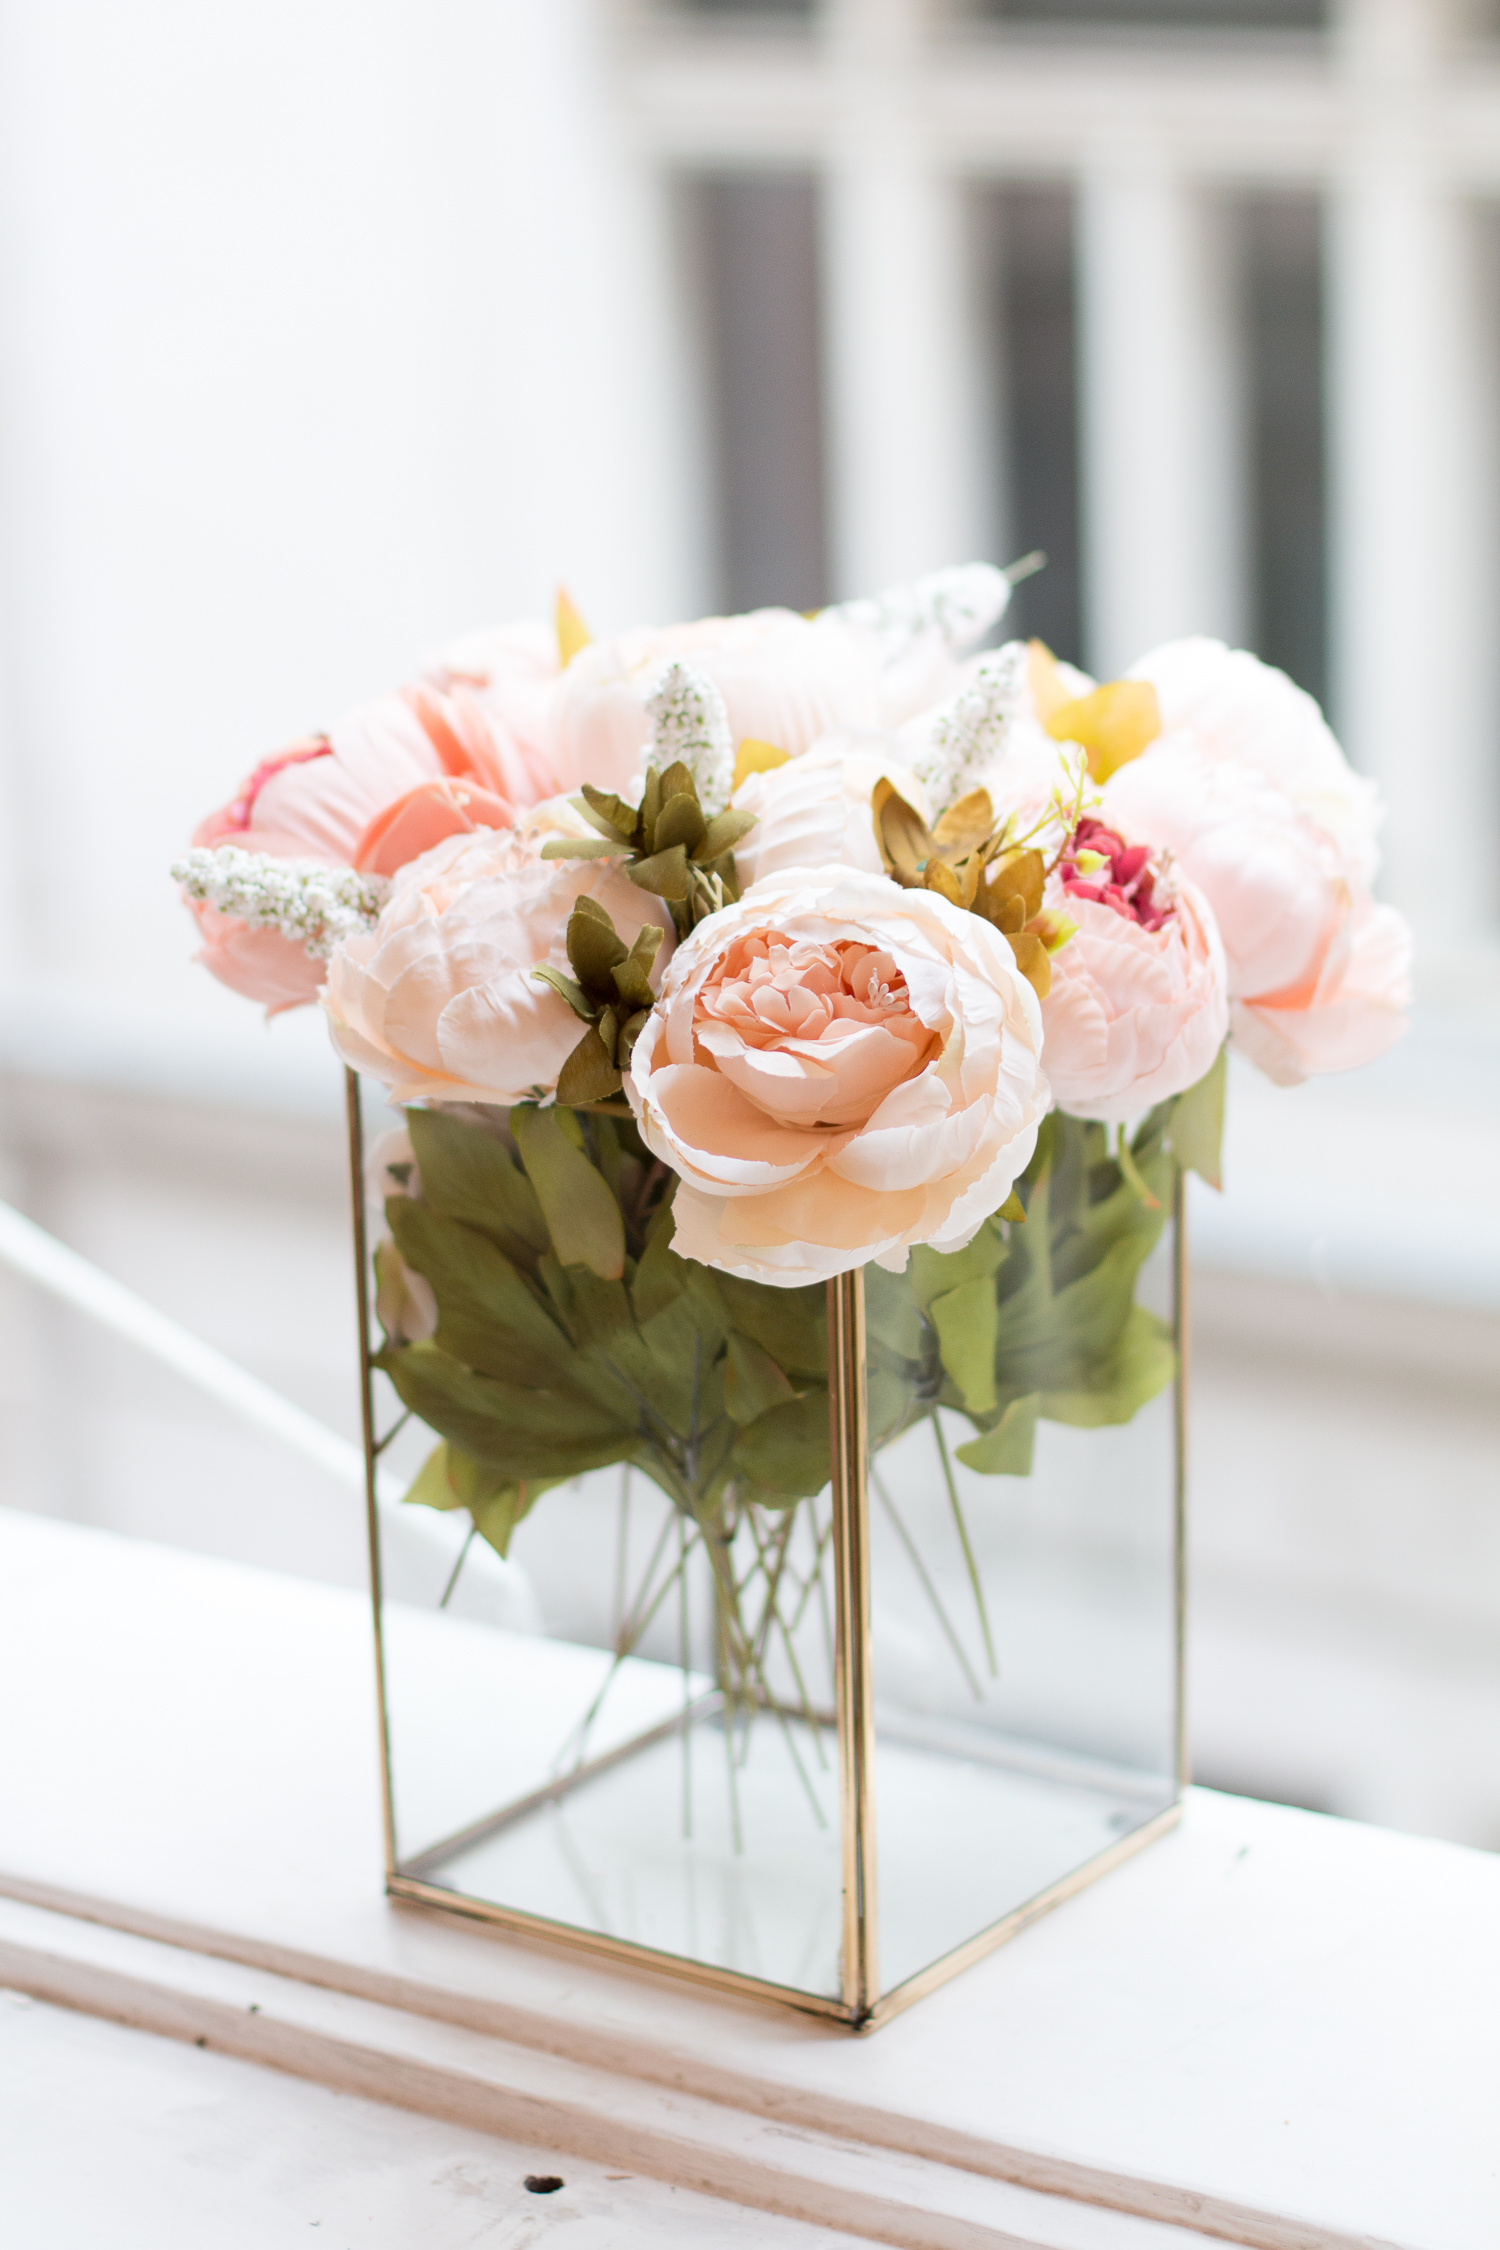 WE ARE FLOWERGIRLS Vienna - flower crowns for weddings | Love Daily Dose